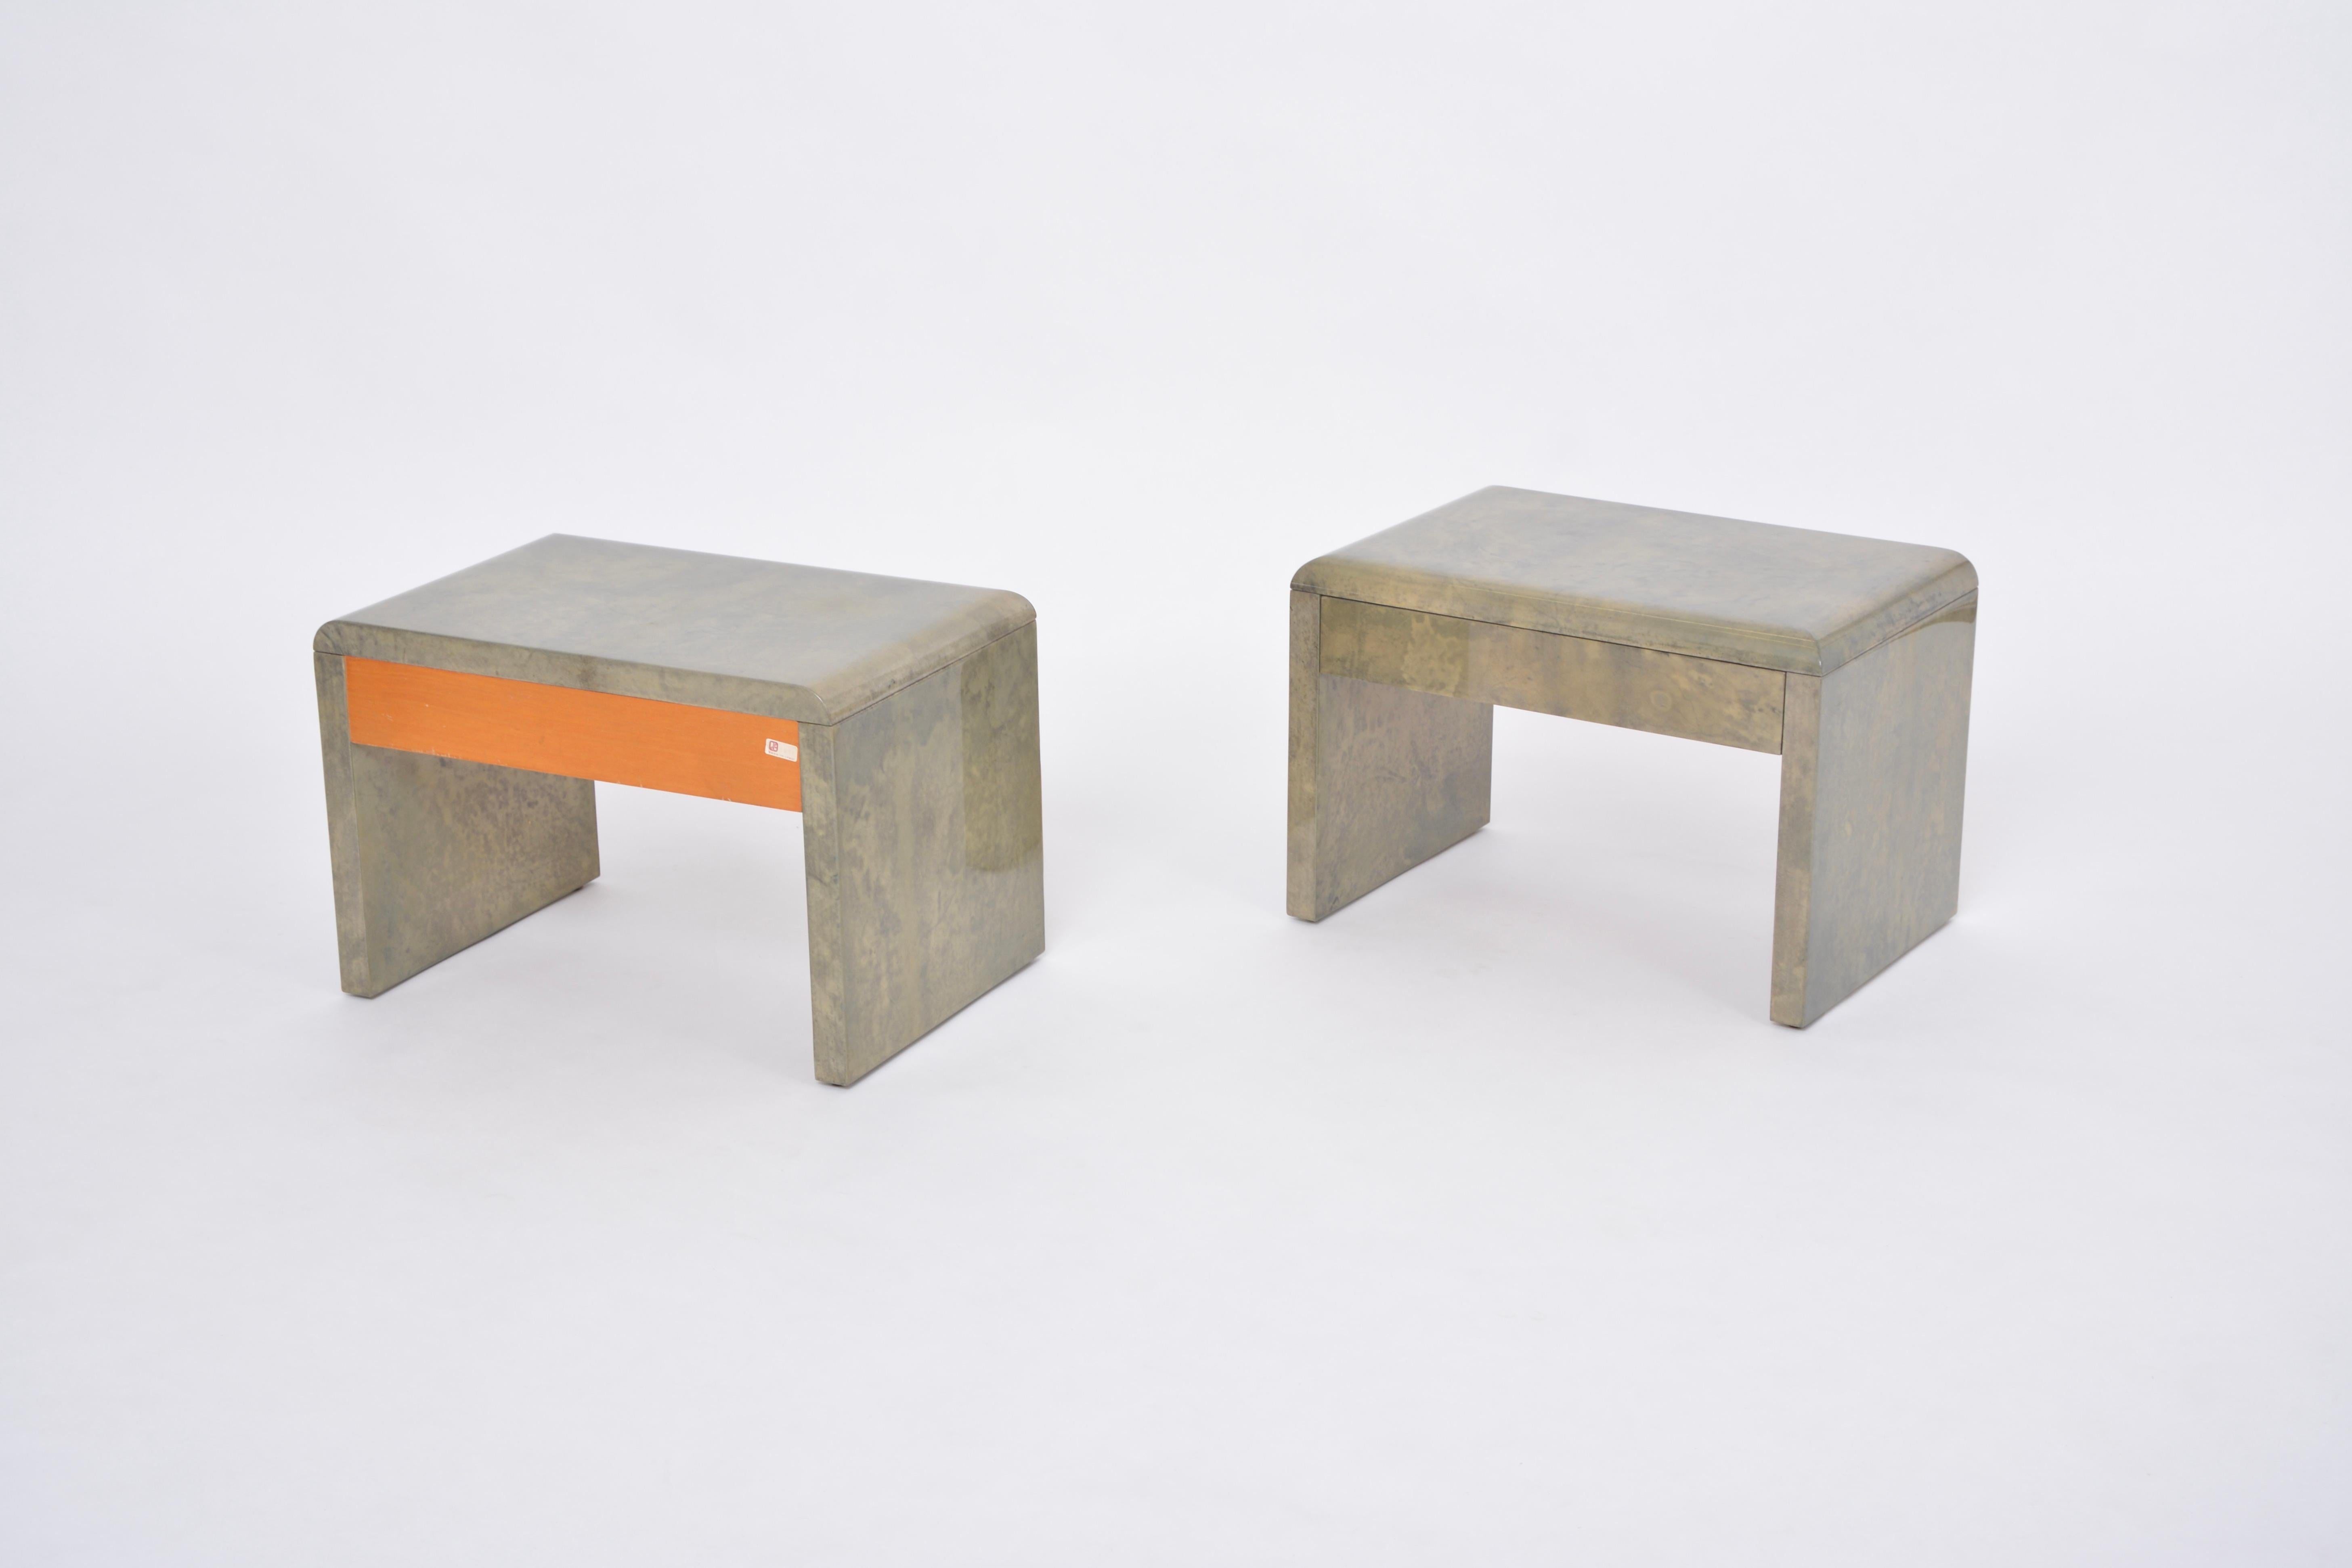 20th Century Mid-Century Modern Bedside Tables Made of Laquered Goat Skin by Aldo Tura